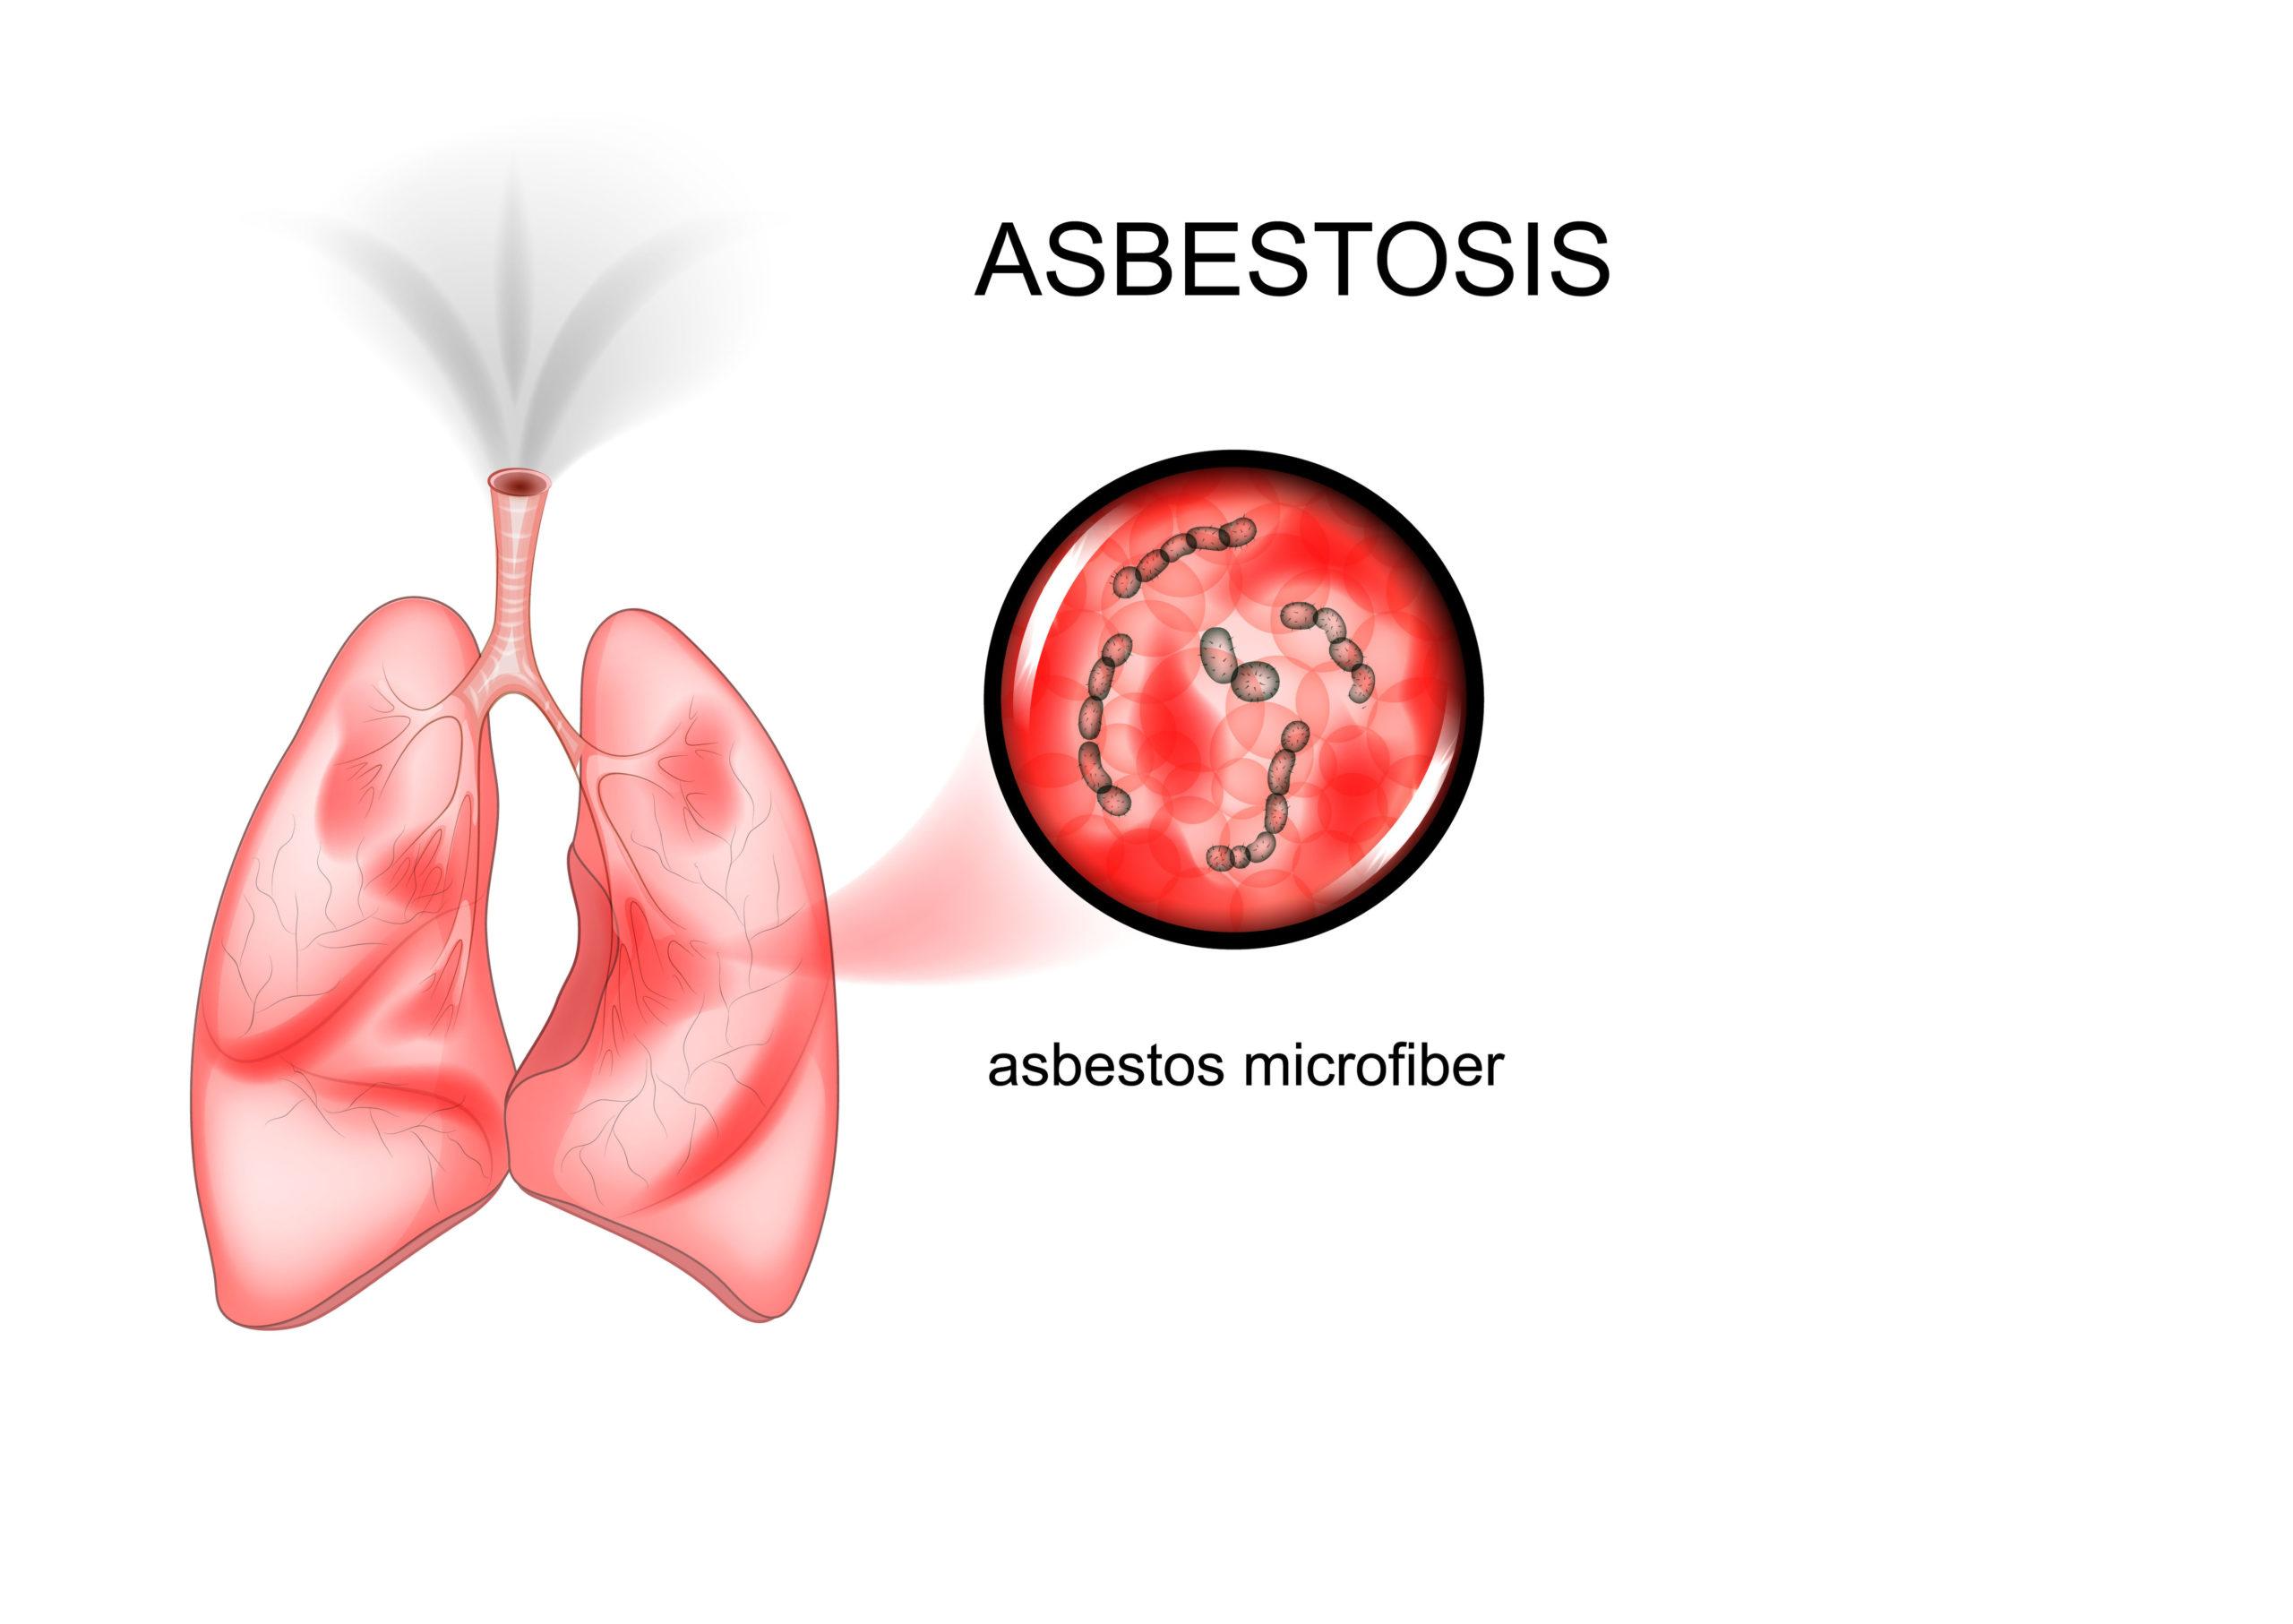 Can asbestos cause lung nodules?